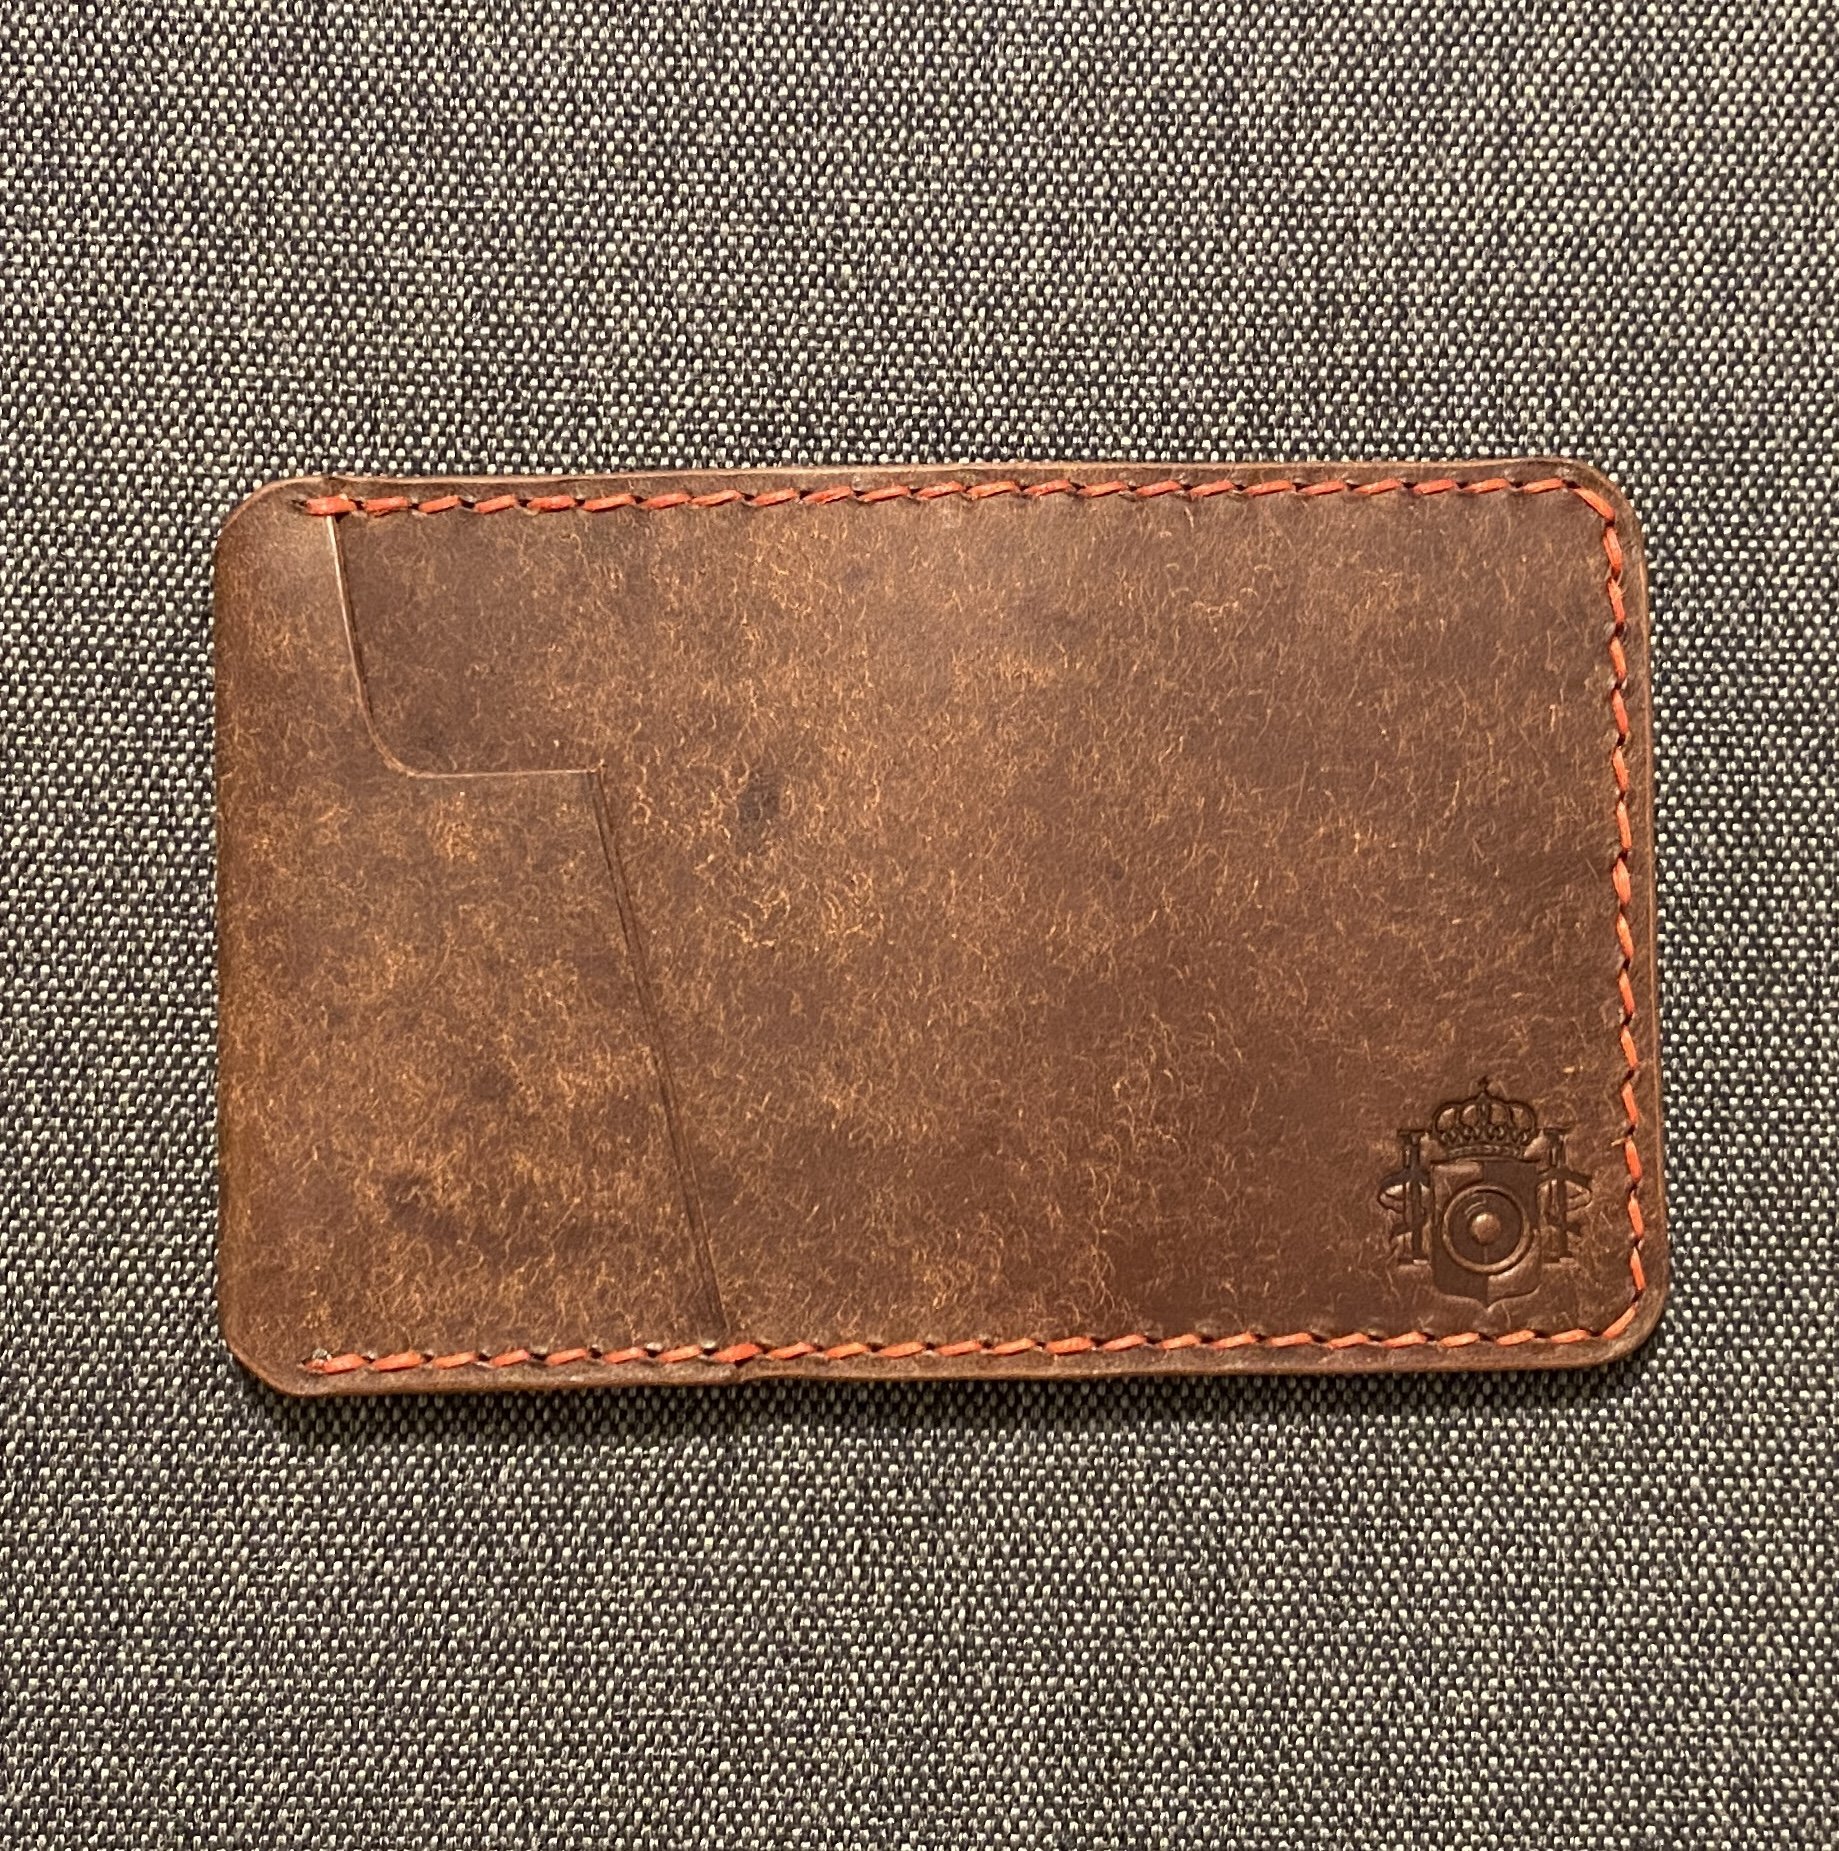 Micro Vanity - Wallets and Small Leather Goods